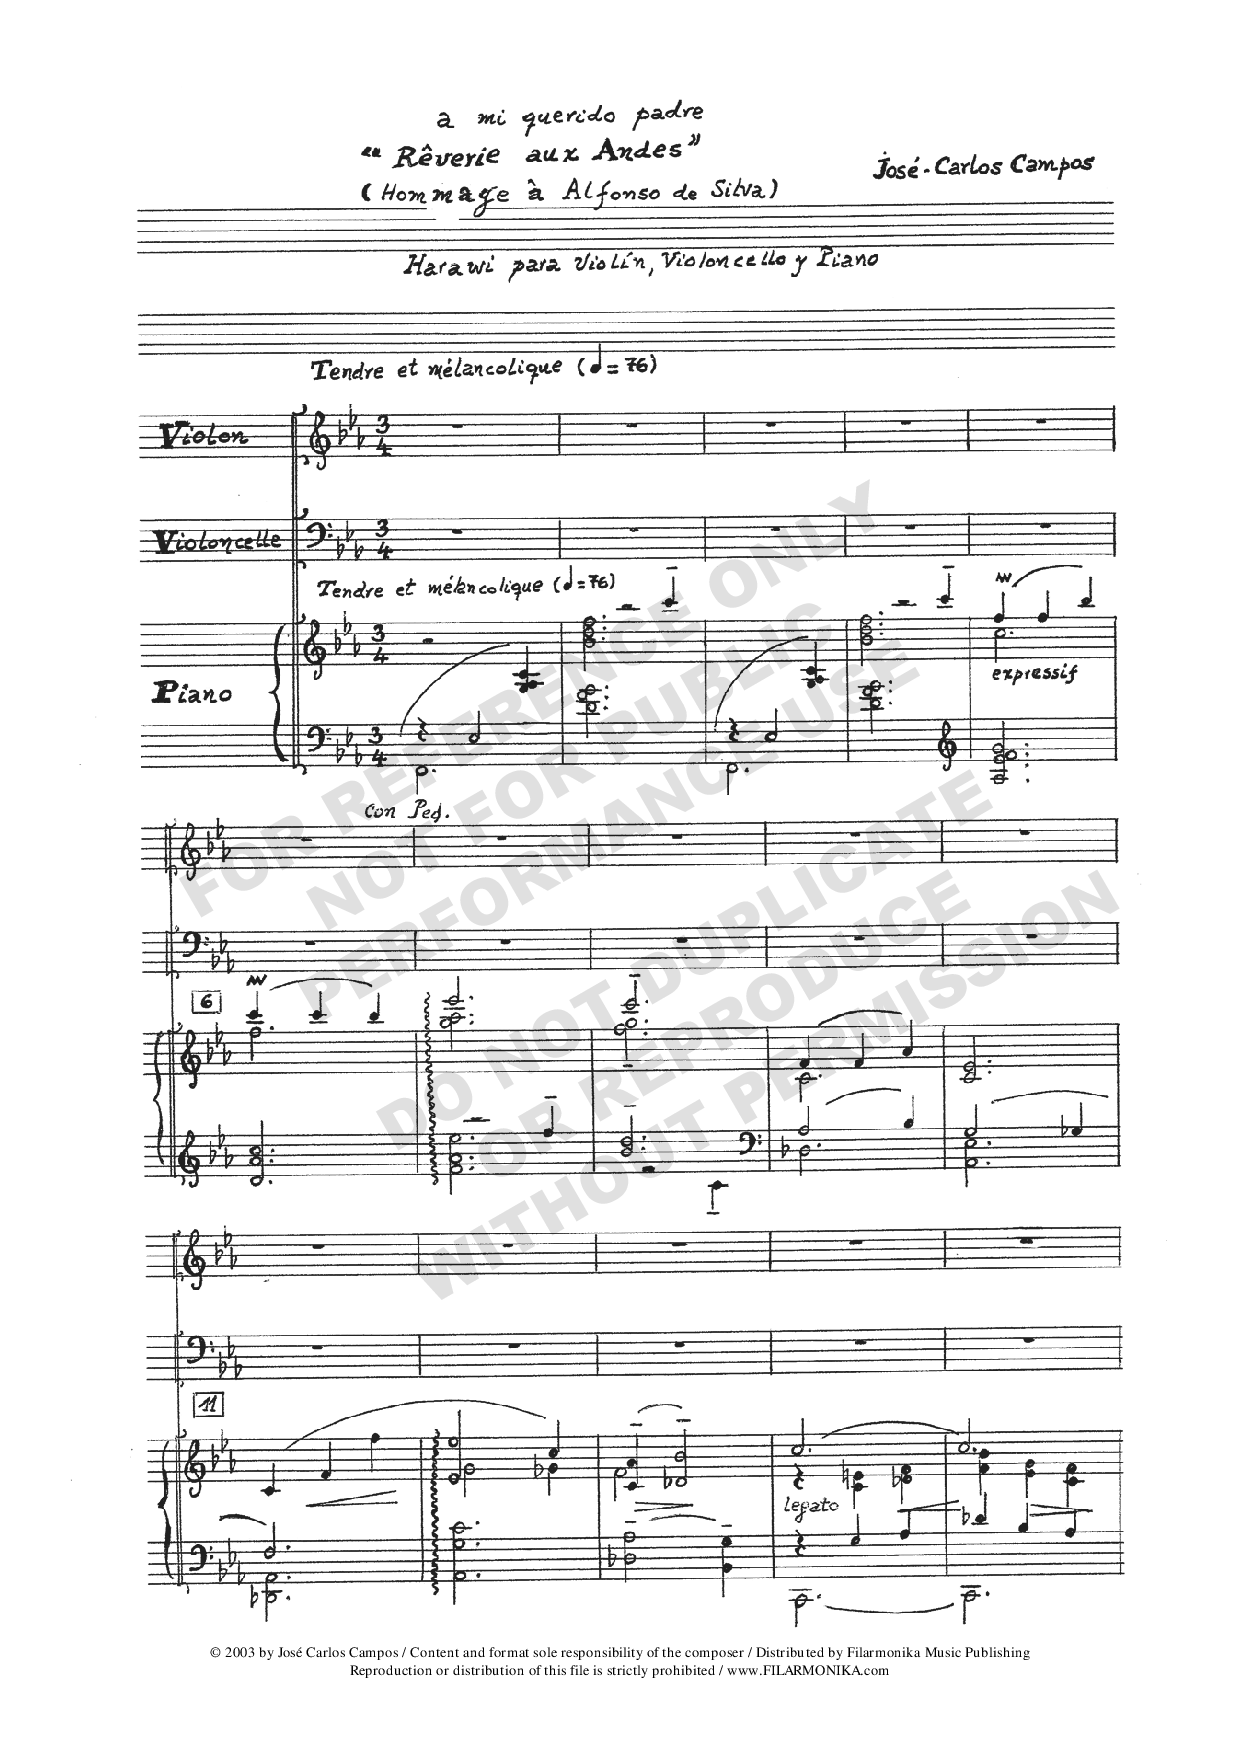 Rêverie aux Andes, for violin, cello, and piano